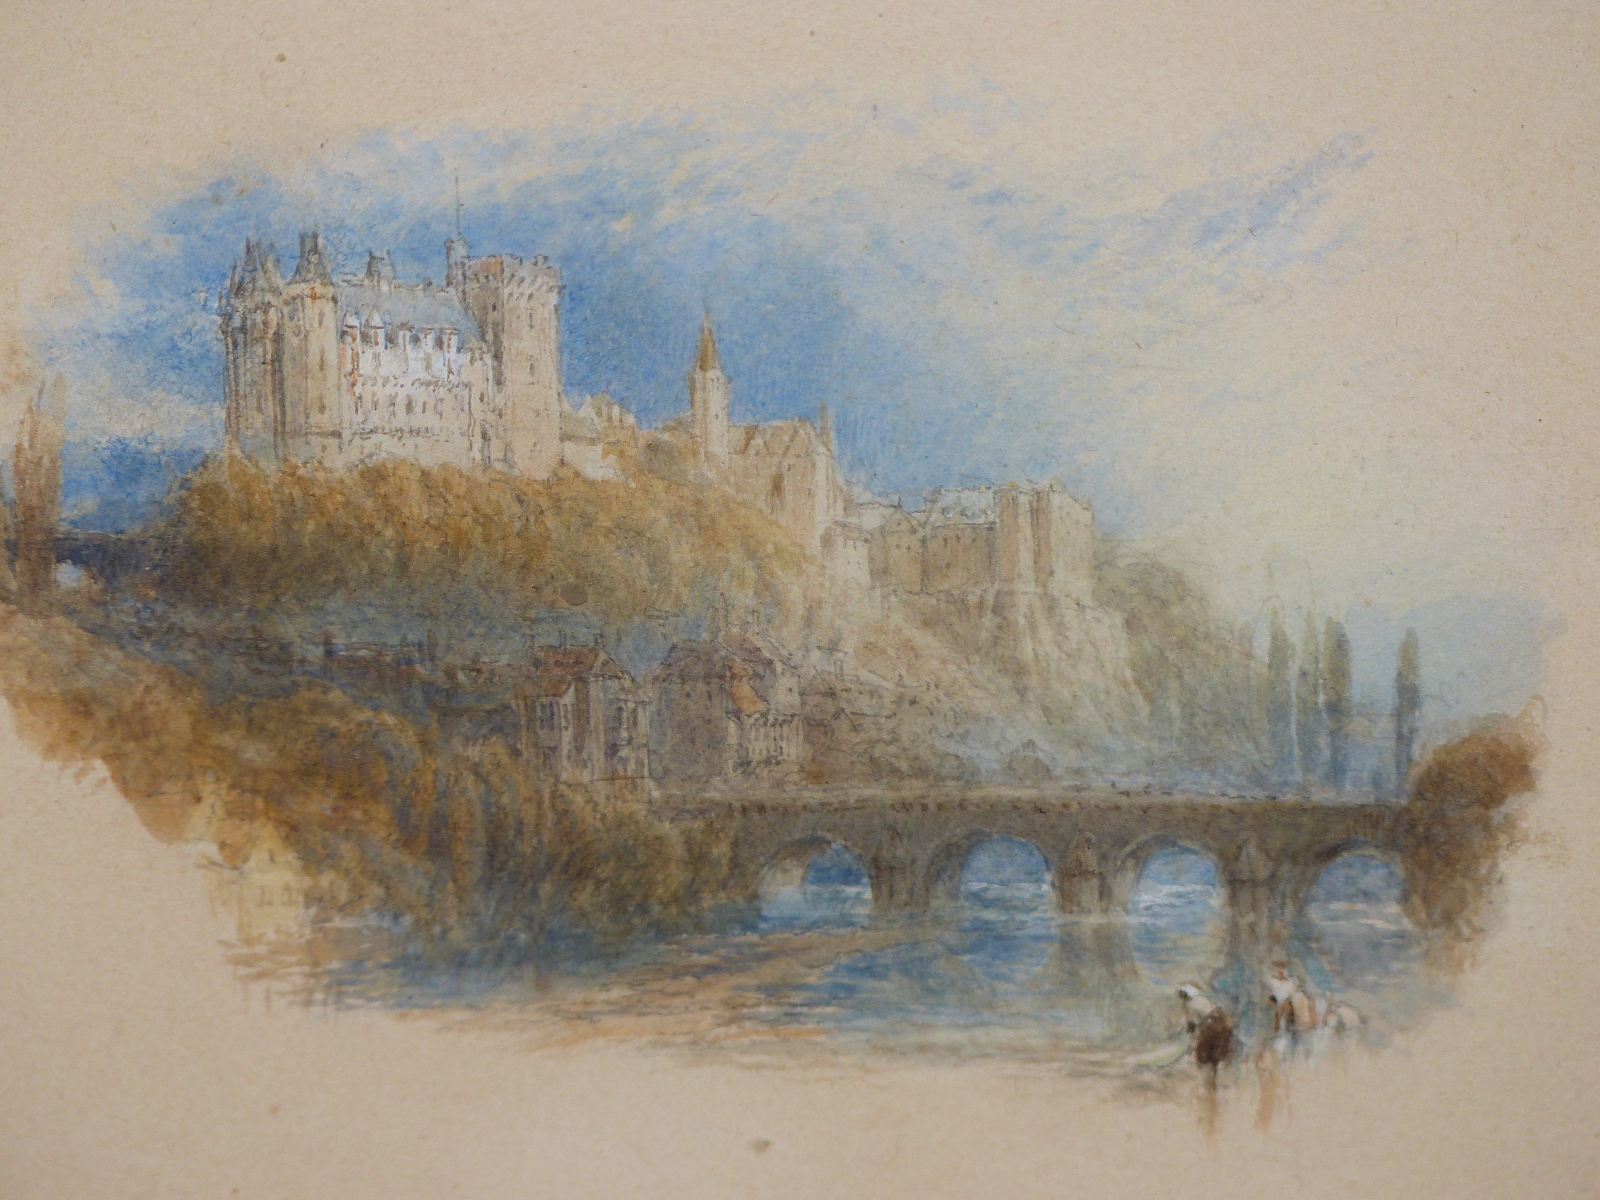 MYLES BIRKET-FOSTER (1825-1899), CASTLE ON HIGH CLIFFS ABOVE A RIVER WITH FIGURES BELOW, UNSIGNED,